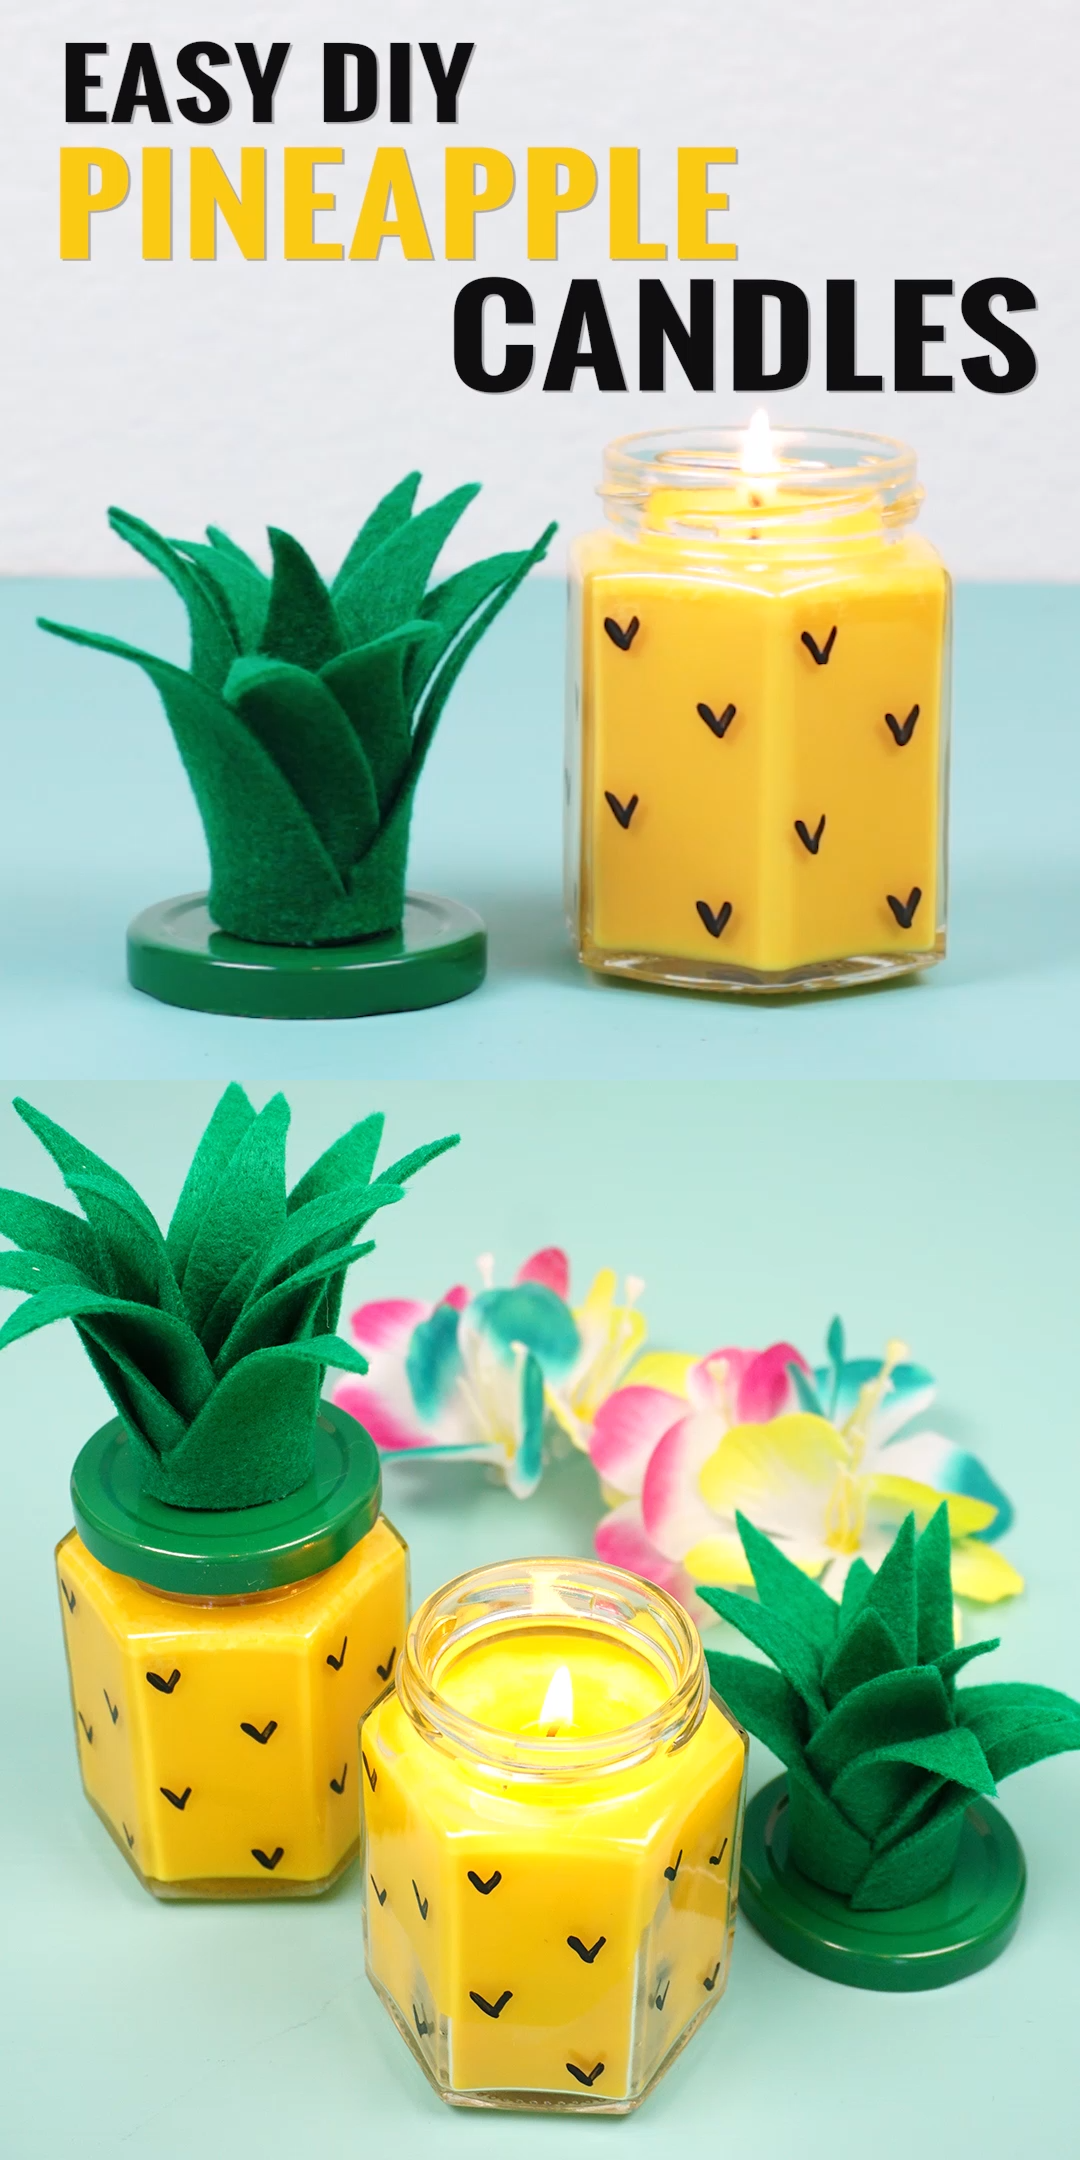 Easy DIY Pineapple Candles - Easy DIY Pineapple Candles -   18 diy for friends ideas